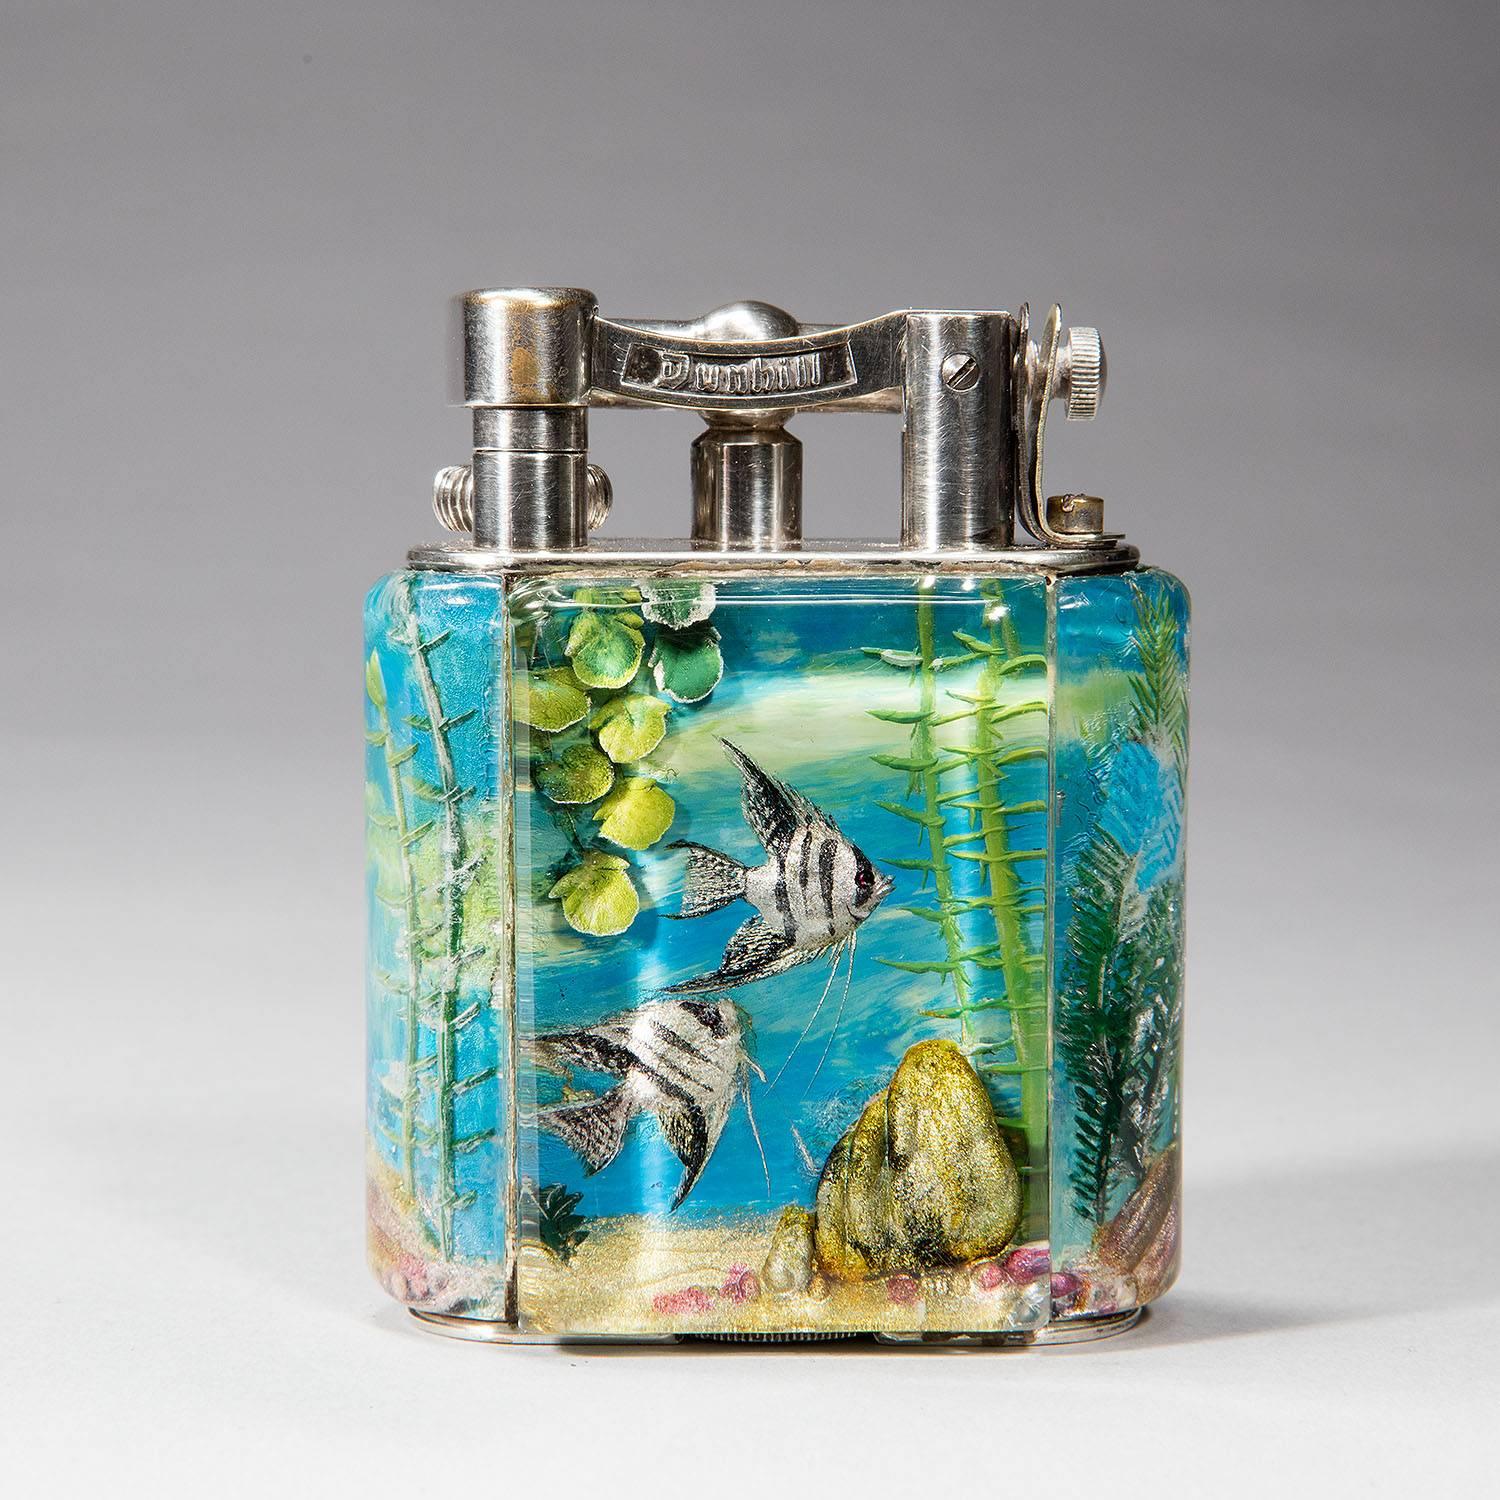 For your consideration, a Dunhill Aquarium lighter made in the mid 50’s. All Dunhill Aquarium lighters are one of a kind as they are hand-painted with aquatic scenes on each of their four sides. The sides are made of Perspex a material similar to